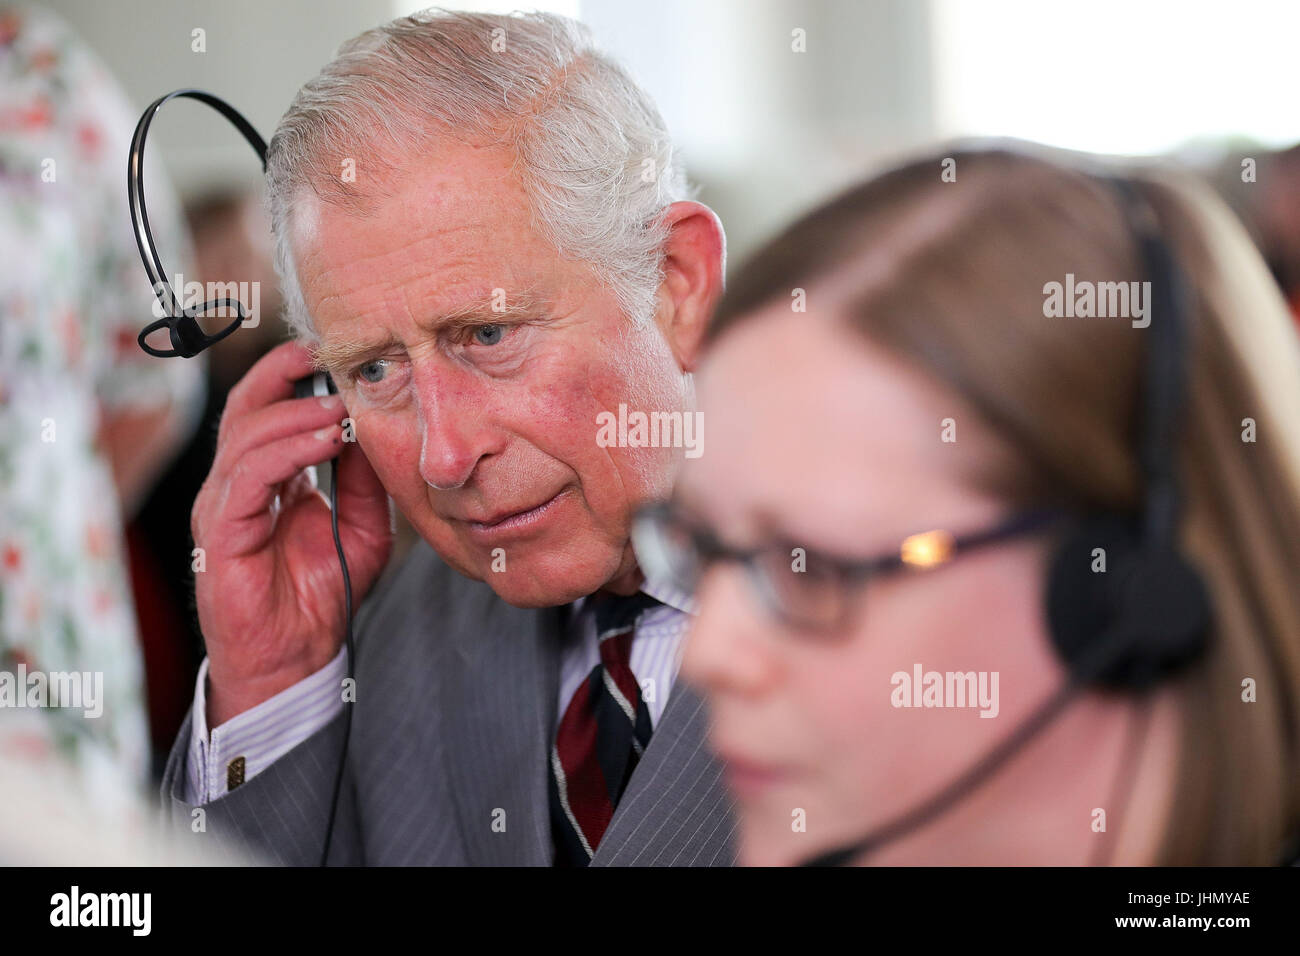 The Prince of Wales listens in to a telephone call with manager Ashley Tatton after he officially opened the new headquarters of Moneypenny, which looks after telephone calls and outsourced digital switchboard services, in Western Gateway, Wrexham. Stock Photo